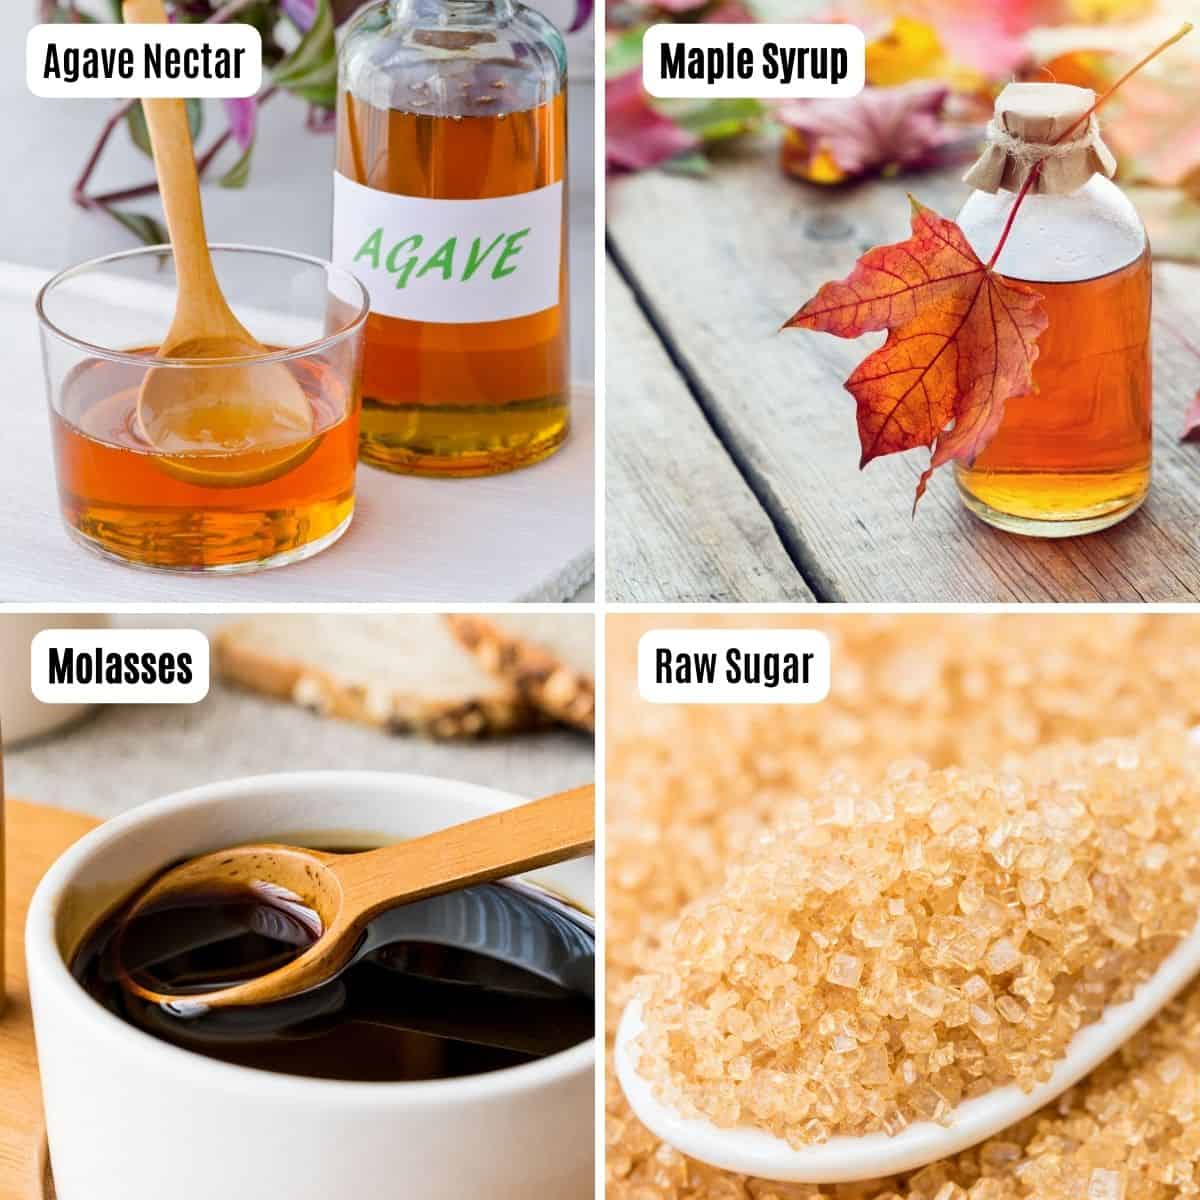 Types of Sweeteners: agave nectar, maple syrup, molasses, raw sugar. 